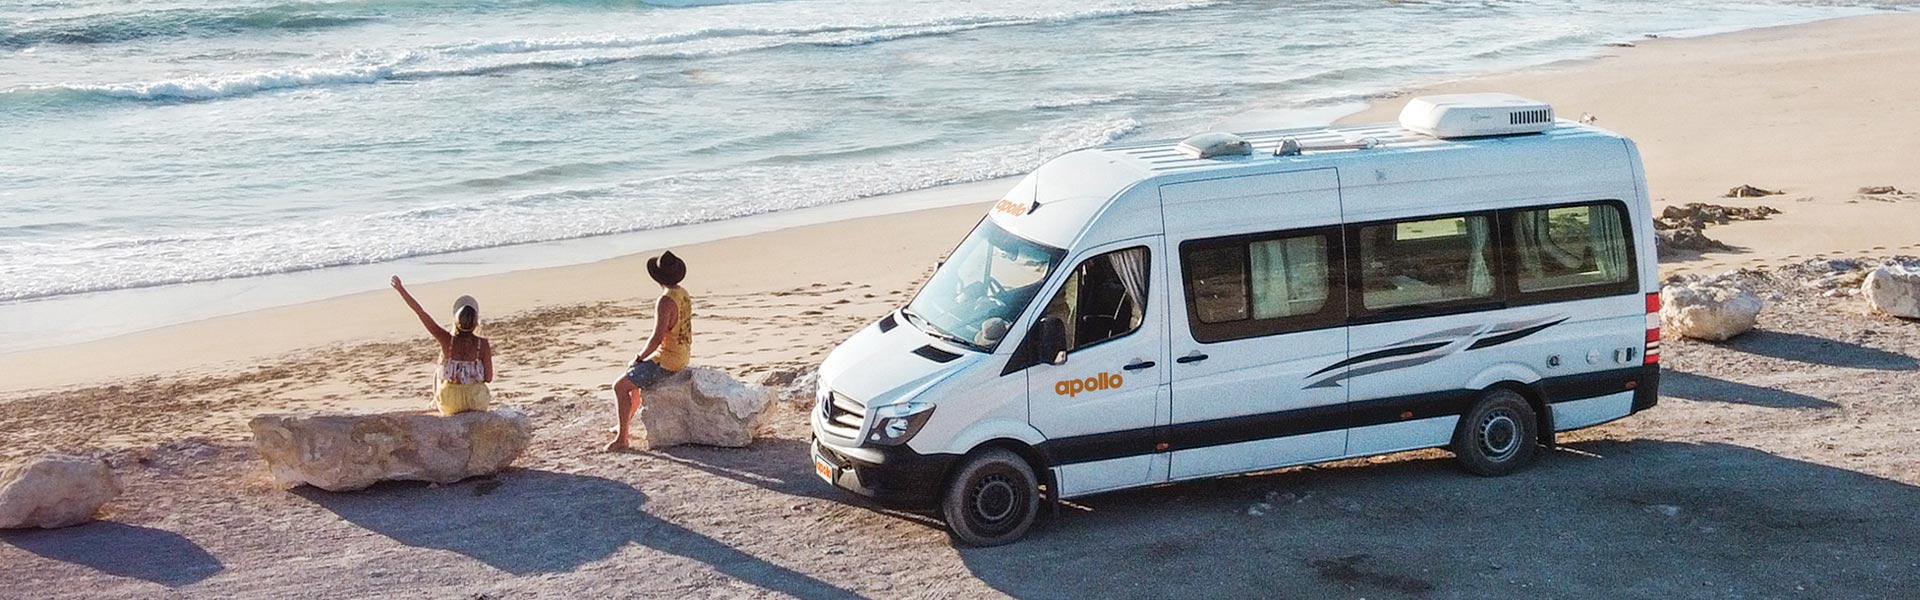 Young man and women sitting on beach in front of Apollo rental campervan